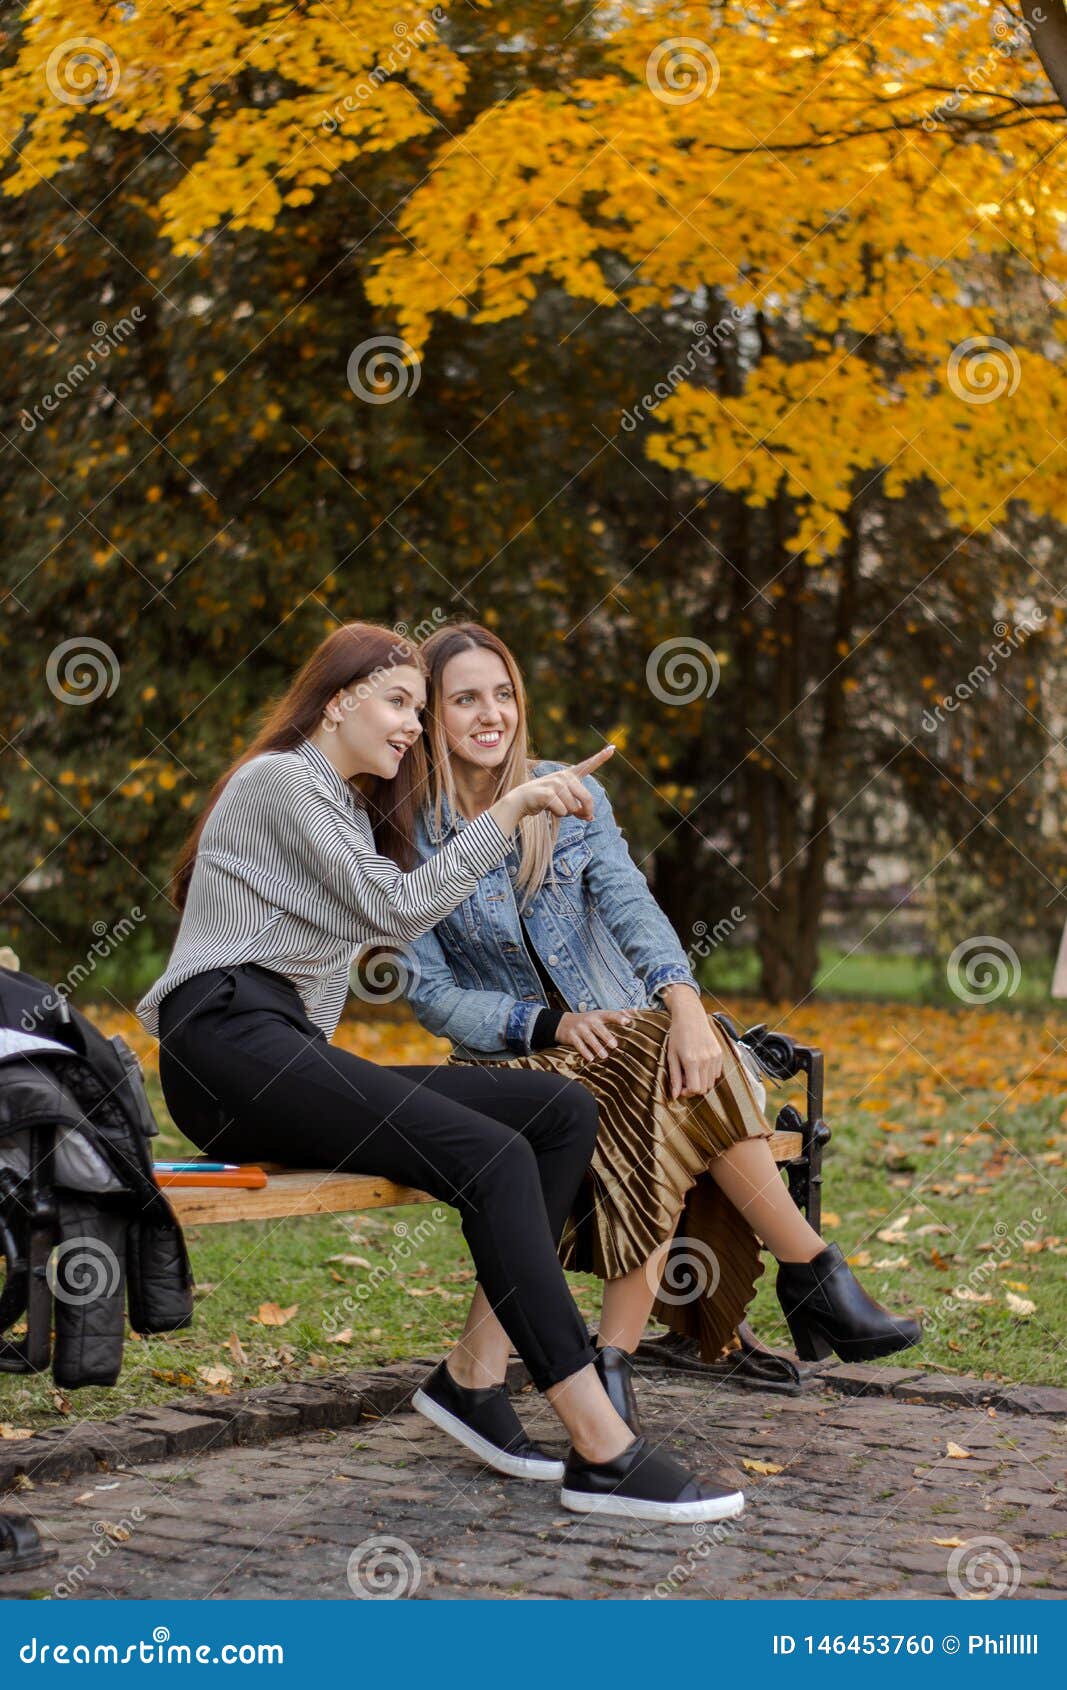 Girlfriends Noticed Something Away Sitting on a Bench in the Autumn ...